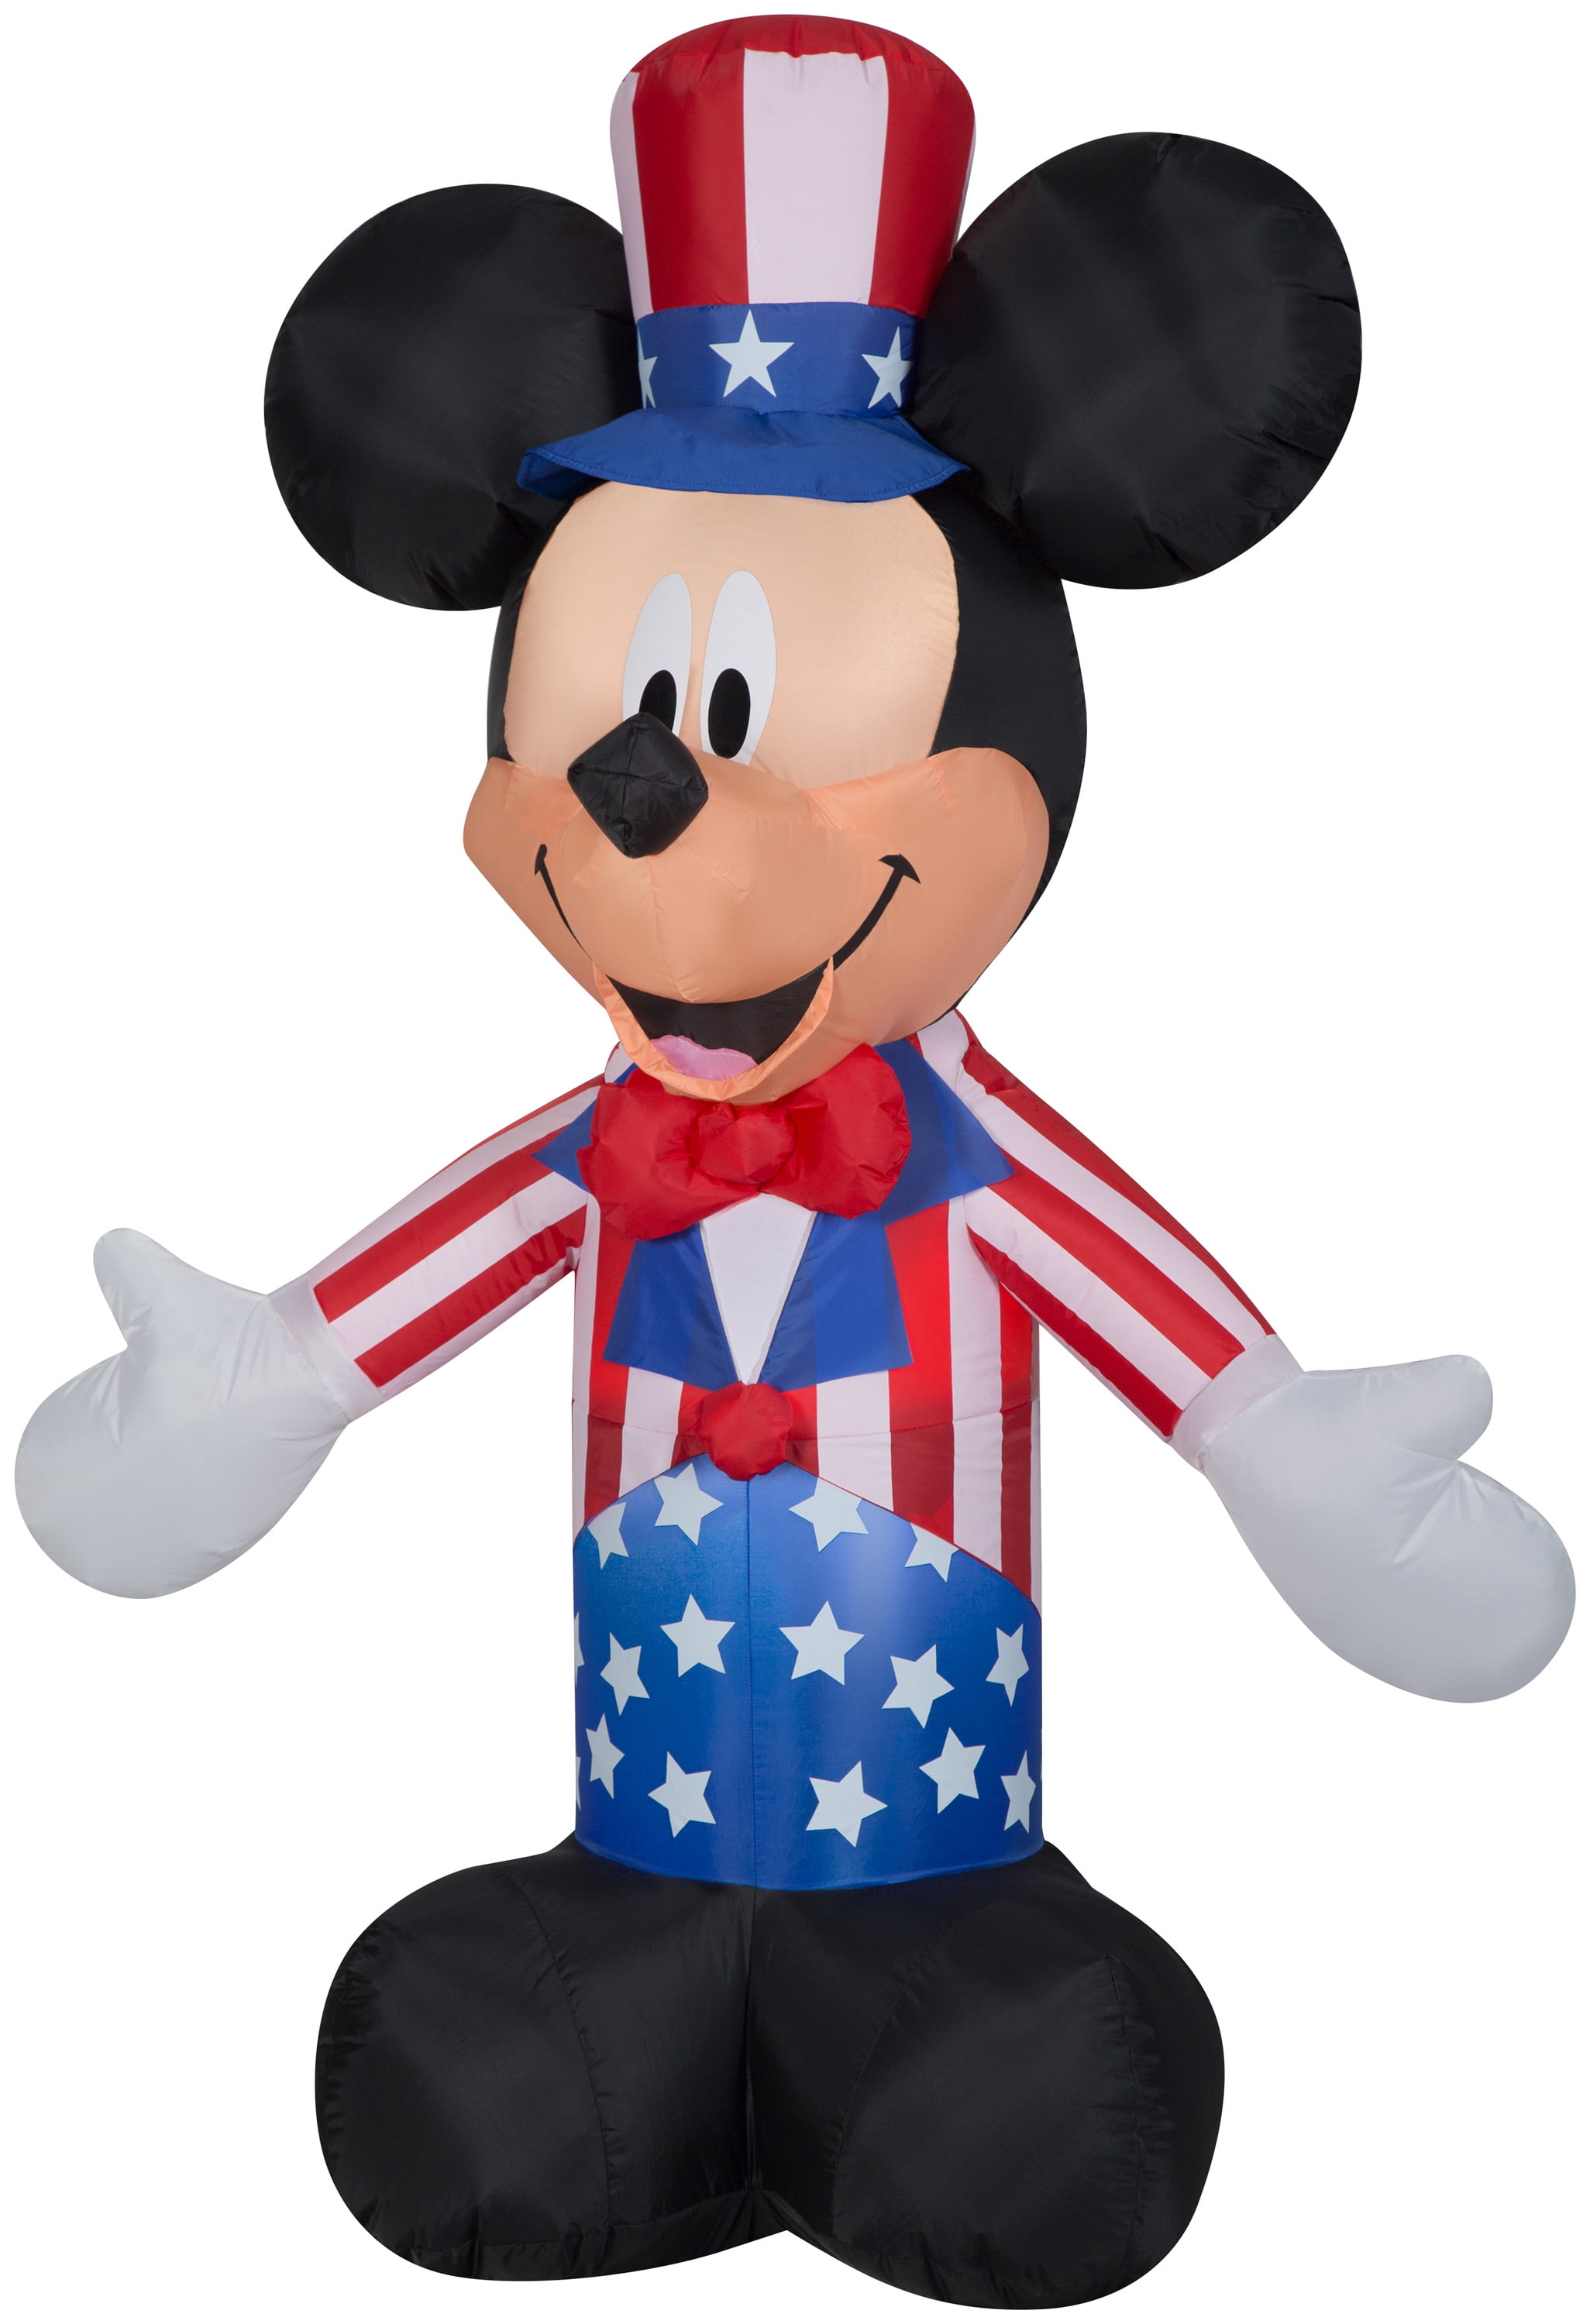 Details about  / 5/' Mickey Mouse Airblown Inflatable by Gemmy Lights Up NIB!